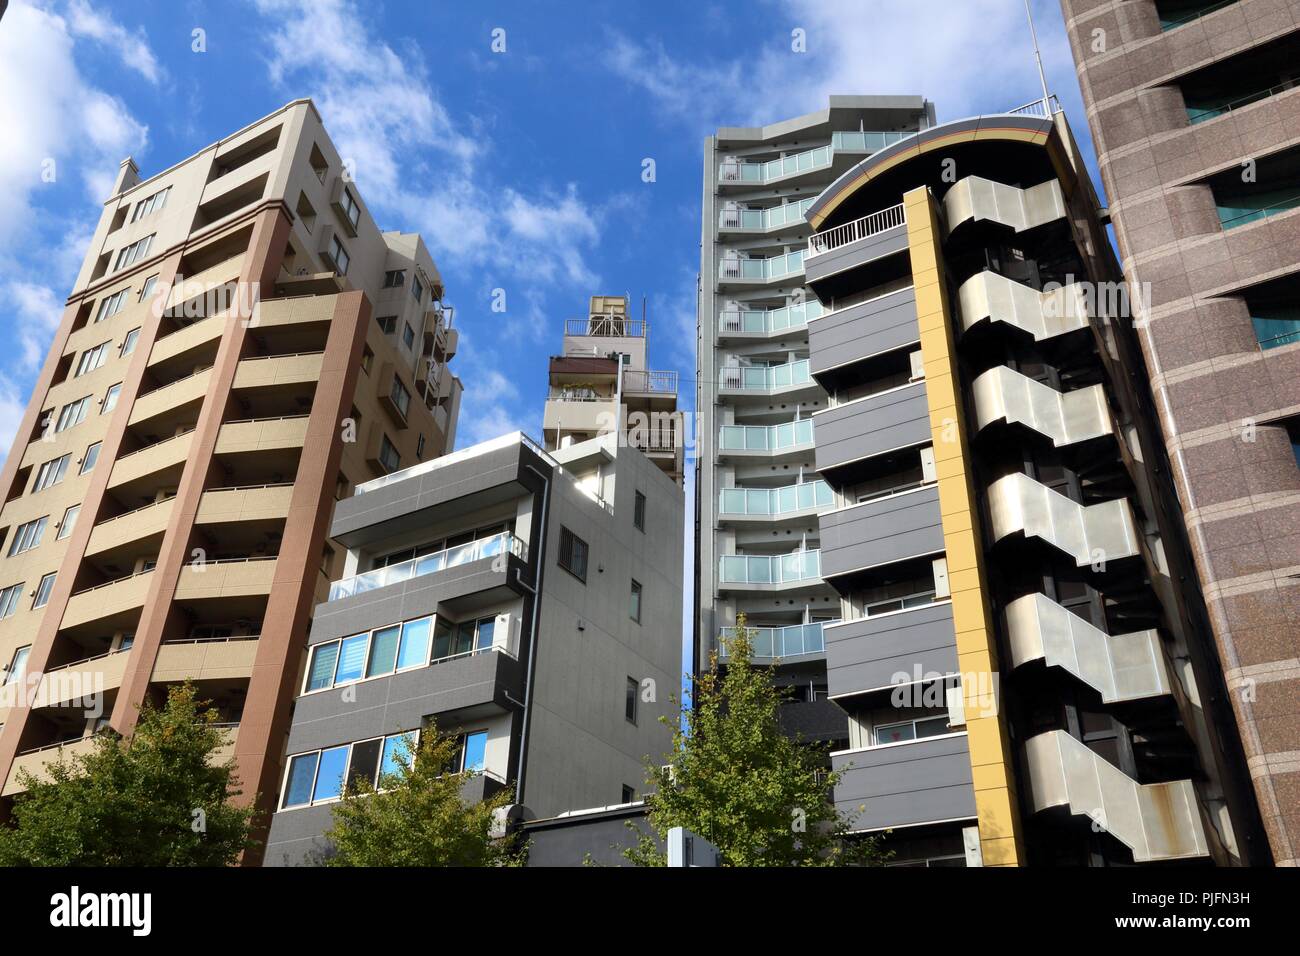 Tokyo typical residential architecture skyline in Asakusa district. Stock Photo